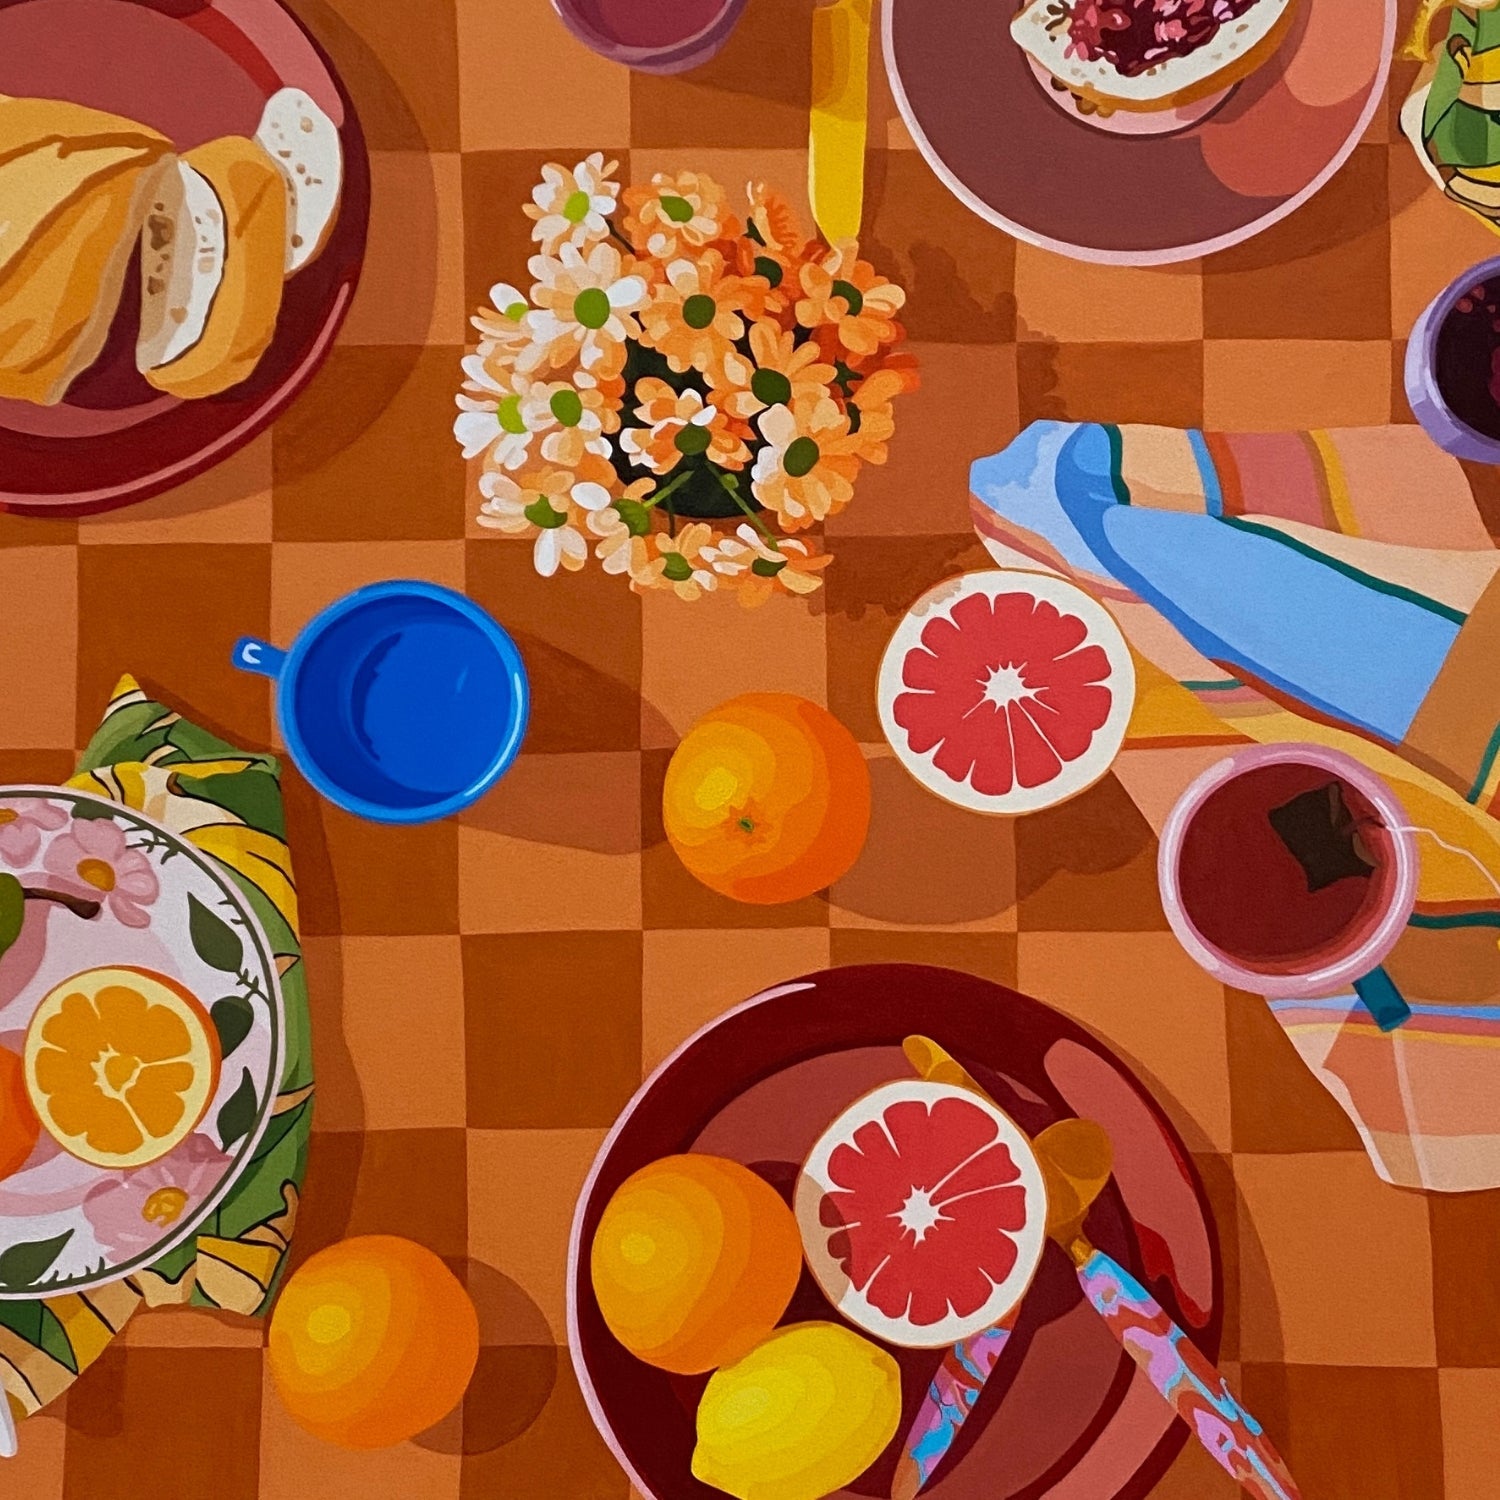 closeup photo of a print of a breakfast setup with oranges, lemons, tea towels, cutlery by kip and co, and flowers and cups on a chequered tablecloth background